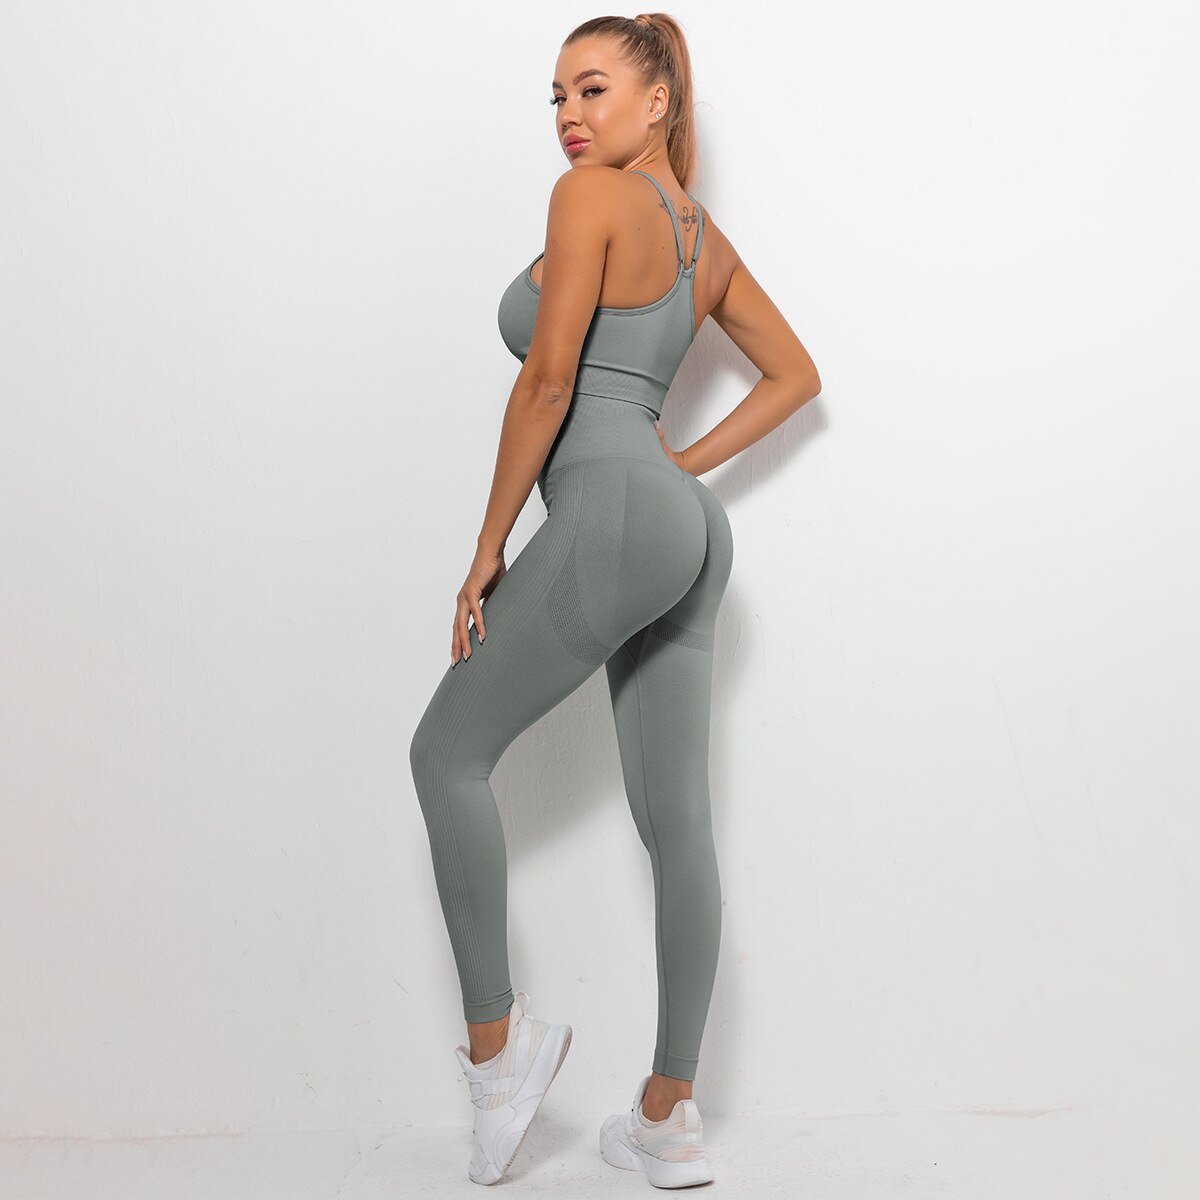 Seamless Yoga Set Spandex Sports Bra Tights Pants Two Piece Sets Womens Outifits Fitness Push Up Leggings Gym Workout Clothes